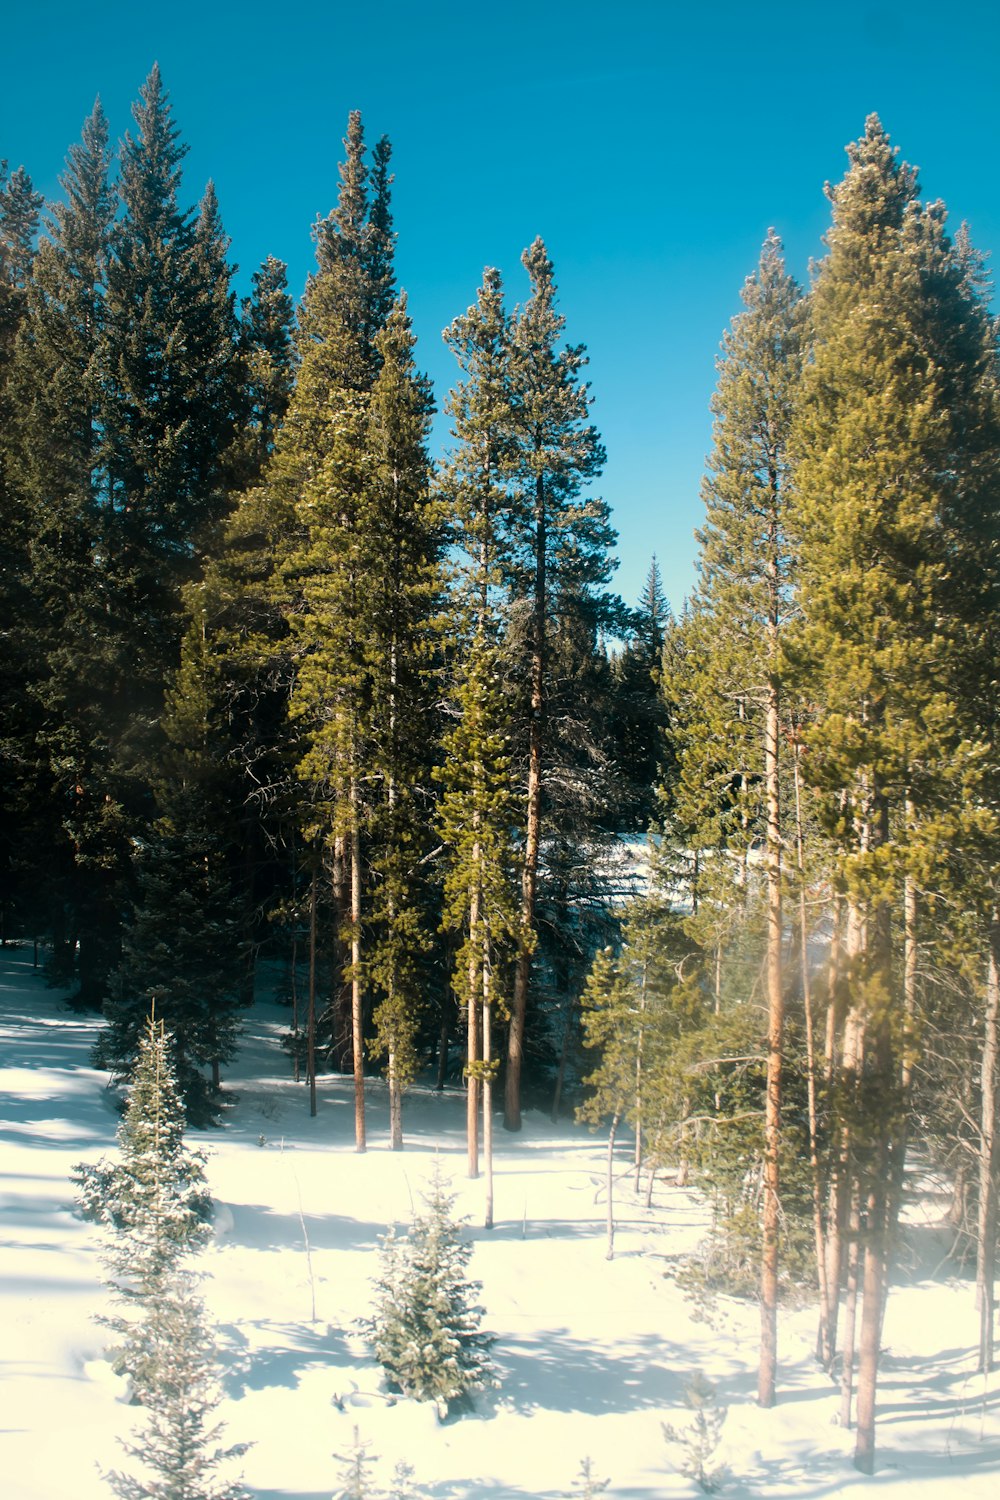 green-leafed trees in a snowy mountain during daytime